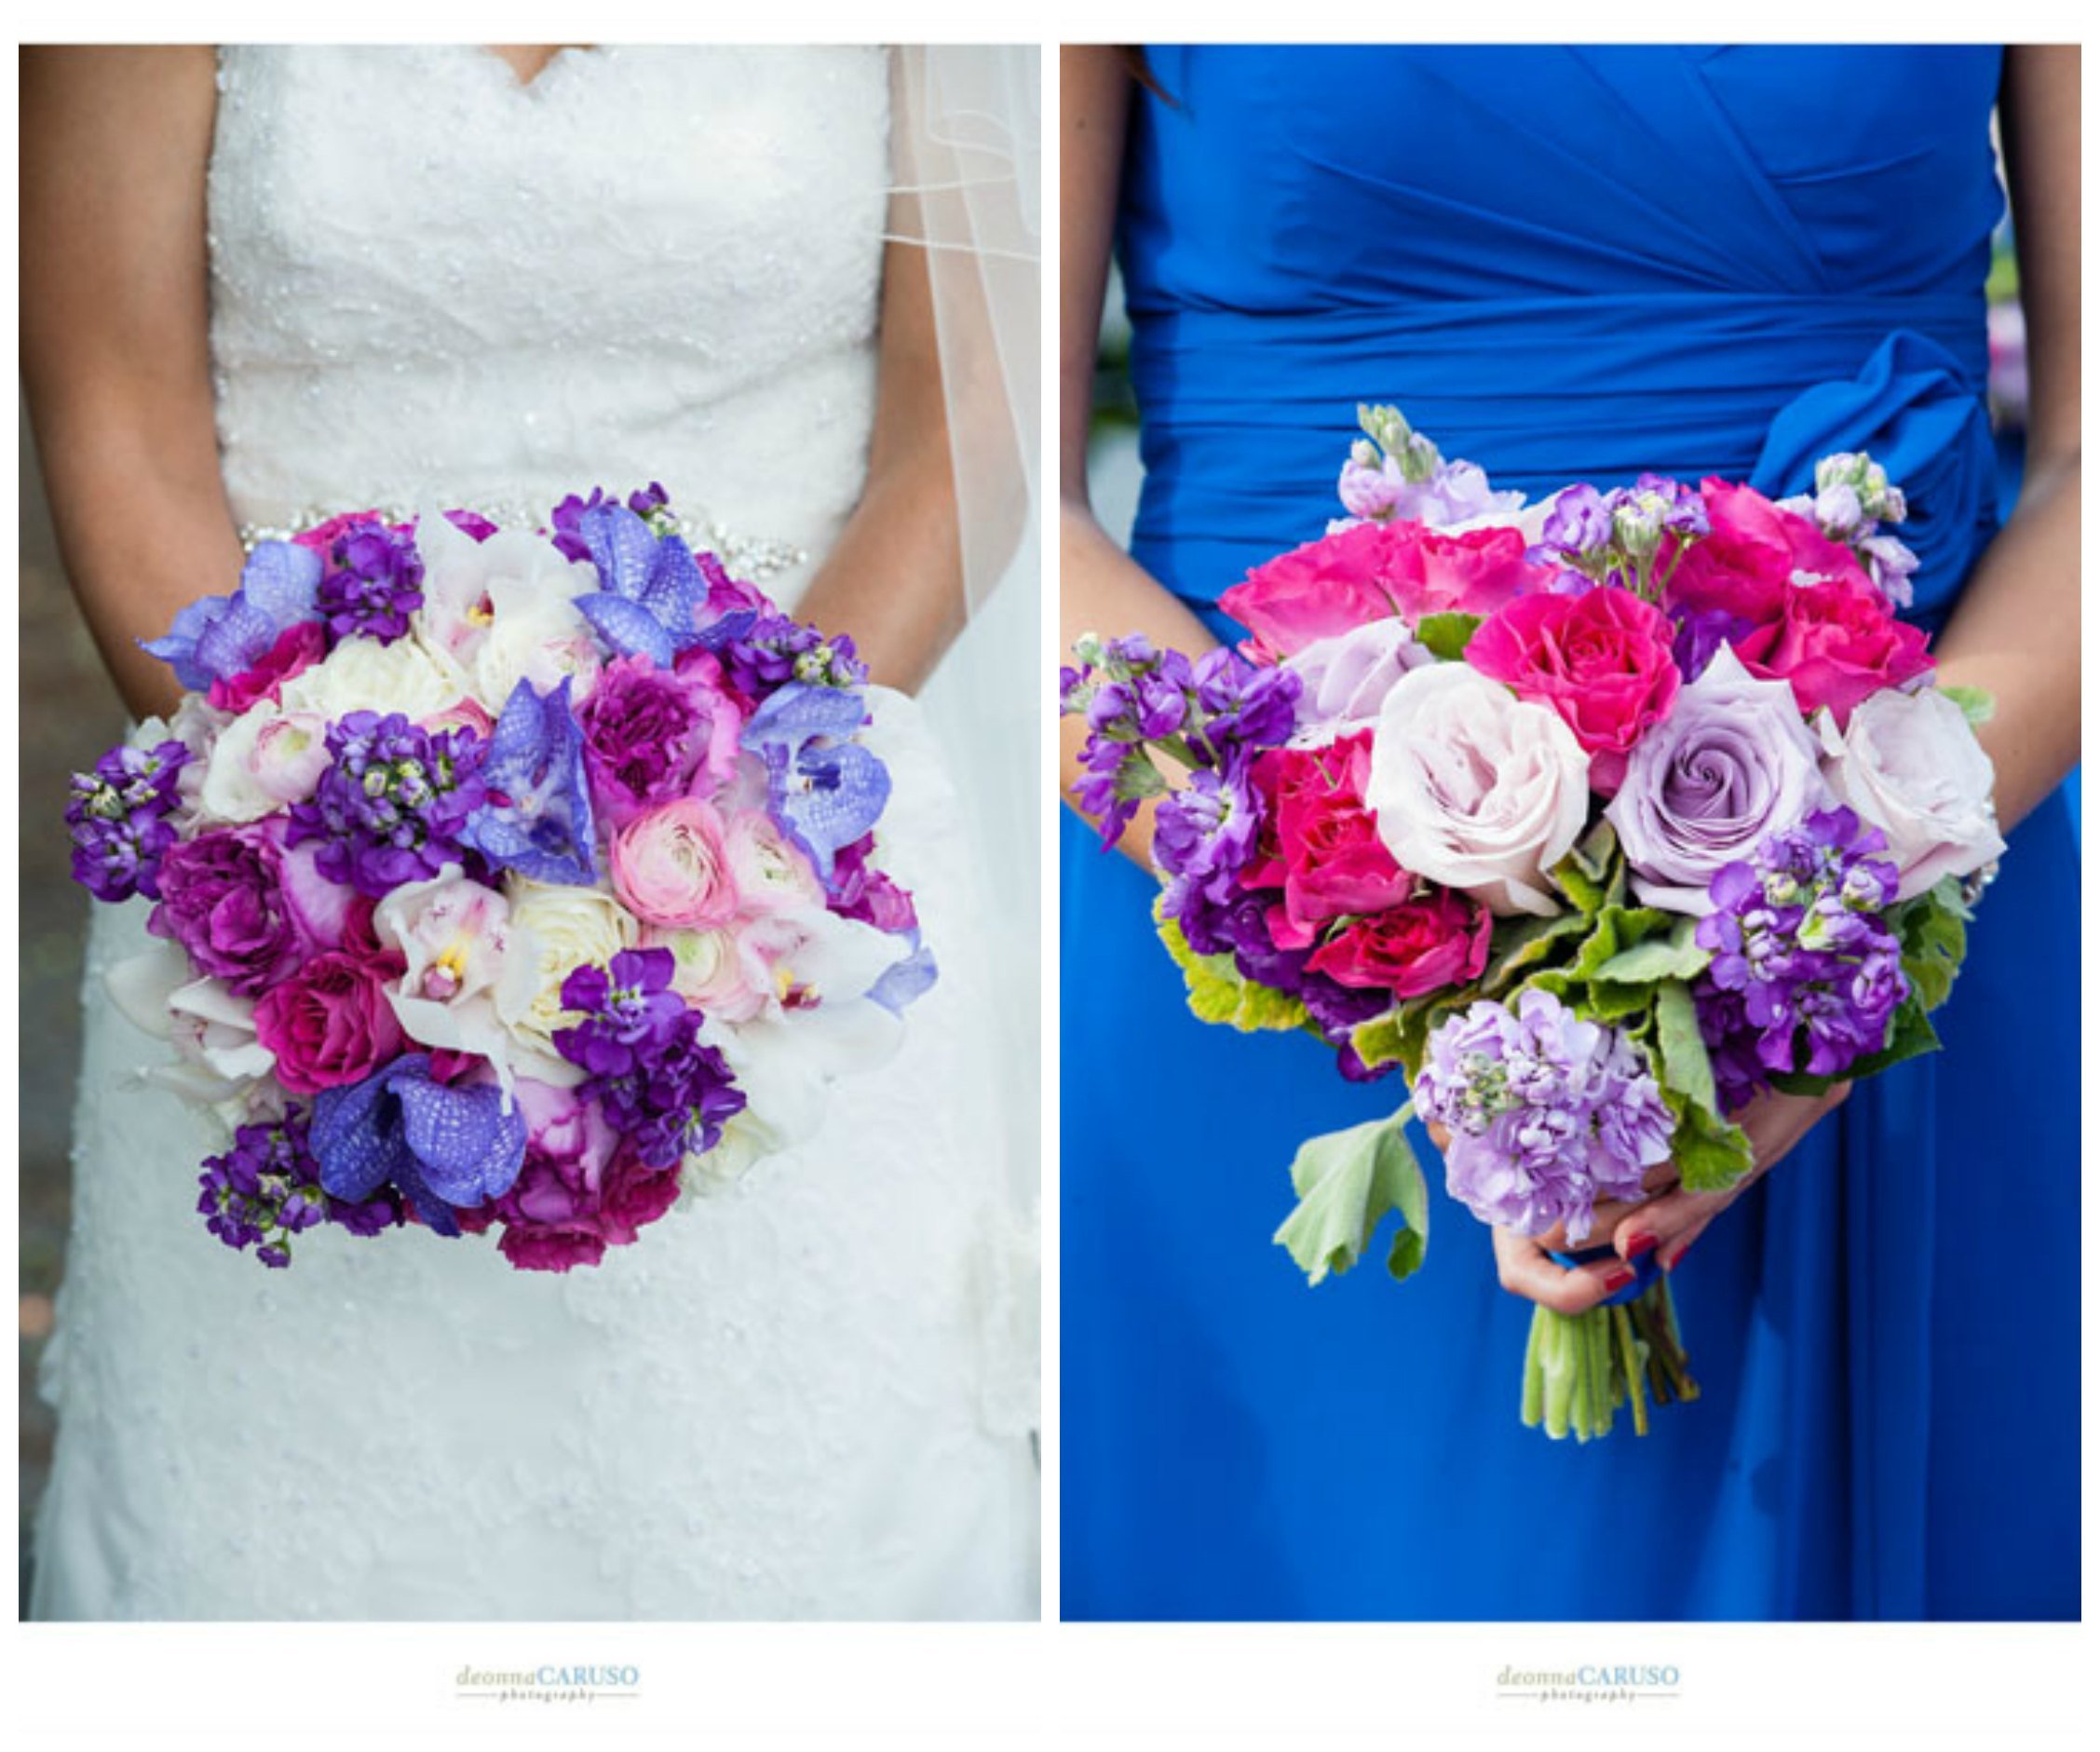 14.-Deonna-Caruso-Photography.-Sweetchic-Events.-Flor-Del-Monte.-Fuchsia-Rose-Lisianthus-Orchid-and-Stock-Brides-Bouquet.-Petite-Fuchsia-Rose-Bouquet..jpg